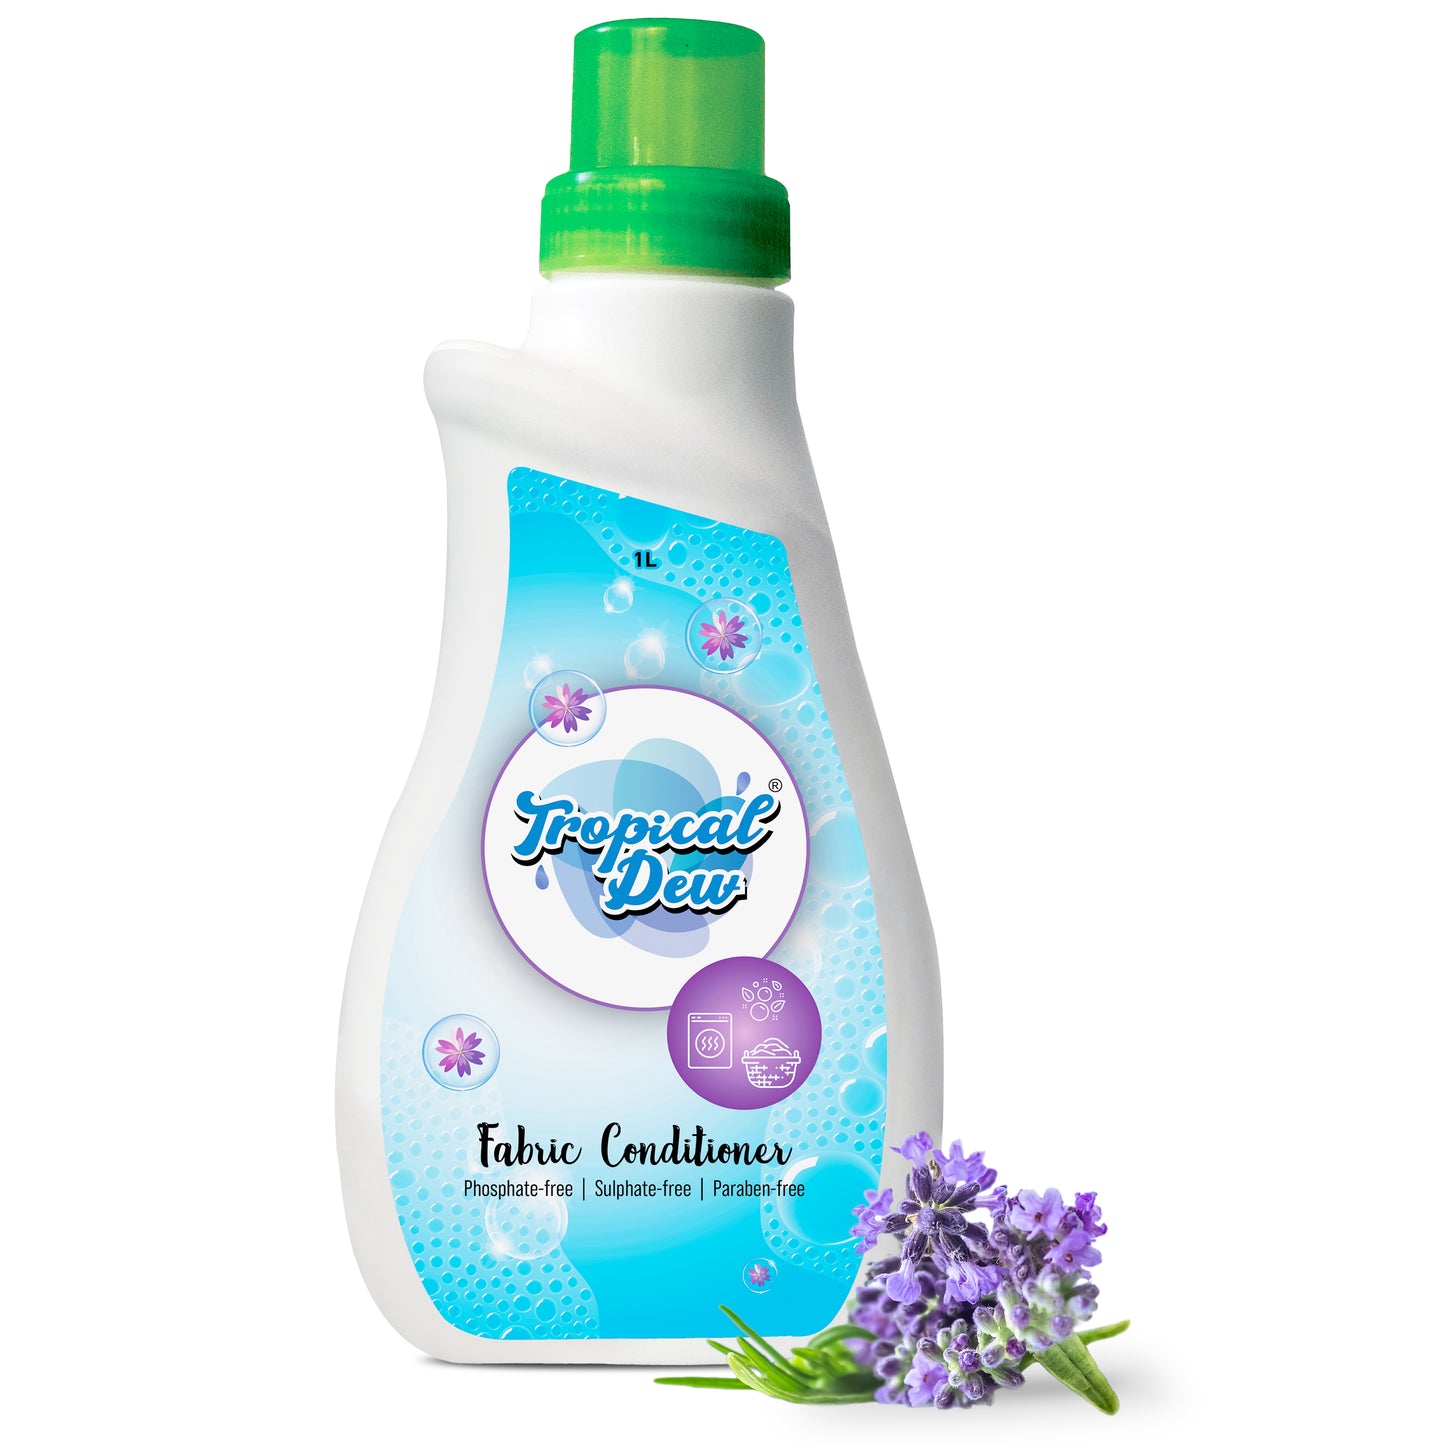 Natural Fabric Softener - Liquid Fabric Softener for Hand Wash, Front Load & Top Load Washing Machine - Phosphate Free, Sulphate & Paraben Free Fabric Conditioner - Tropical Dew, Lavender Scent, 1L